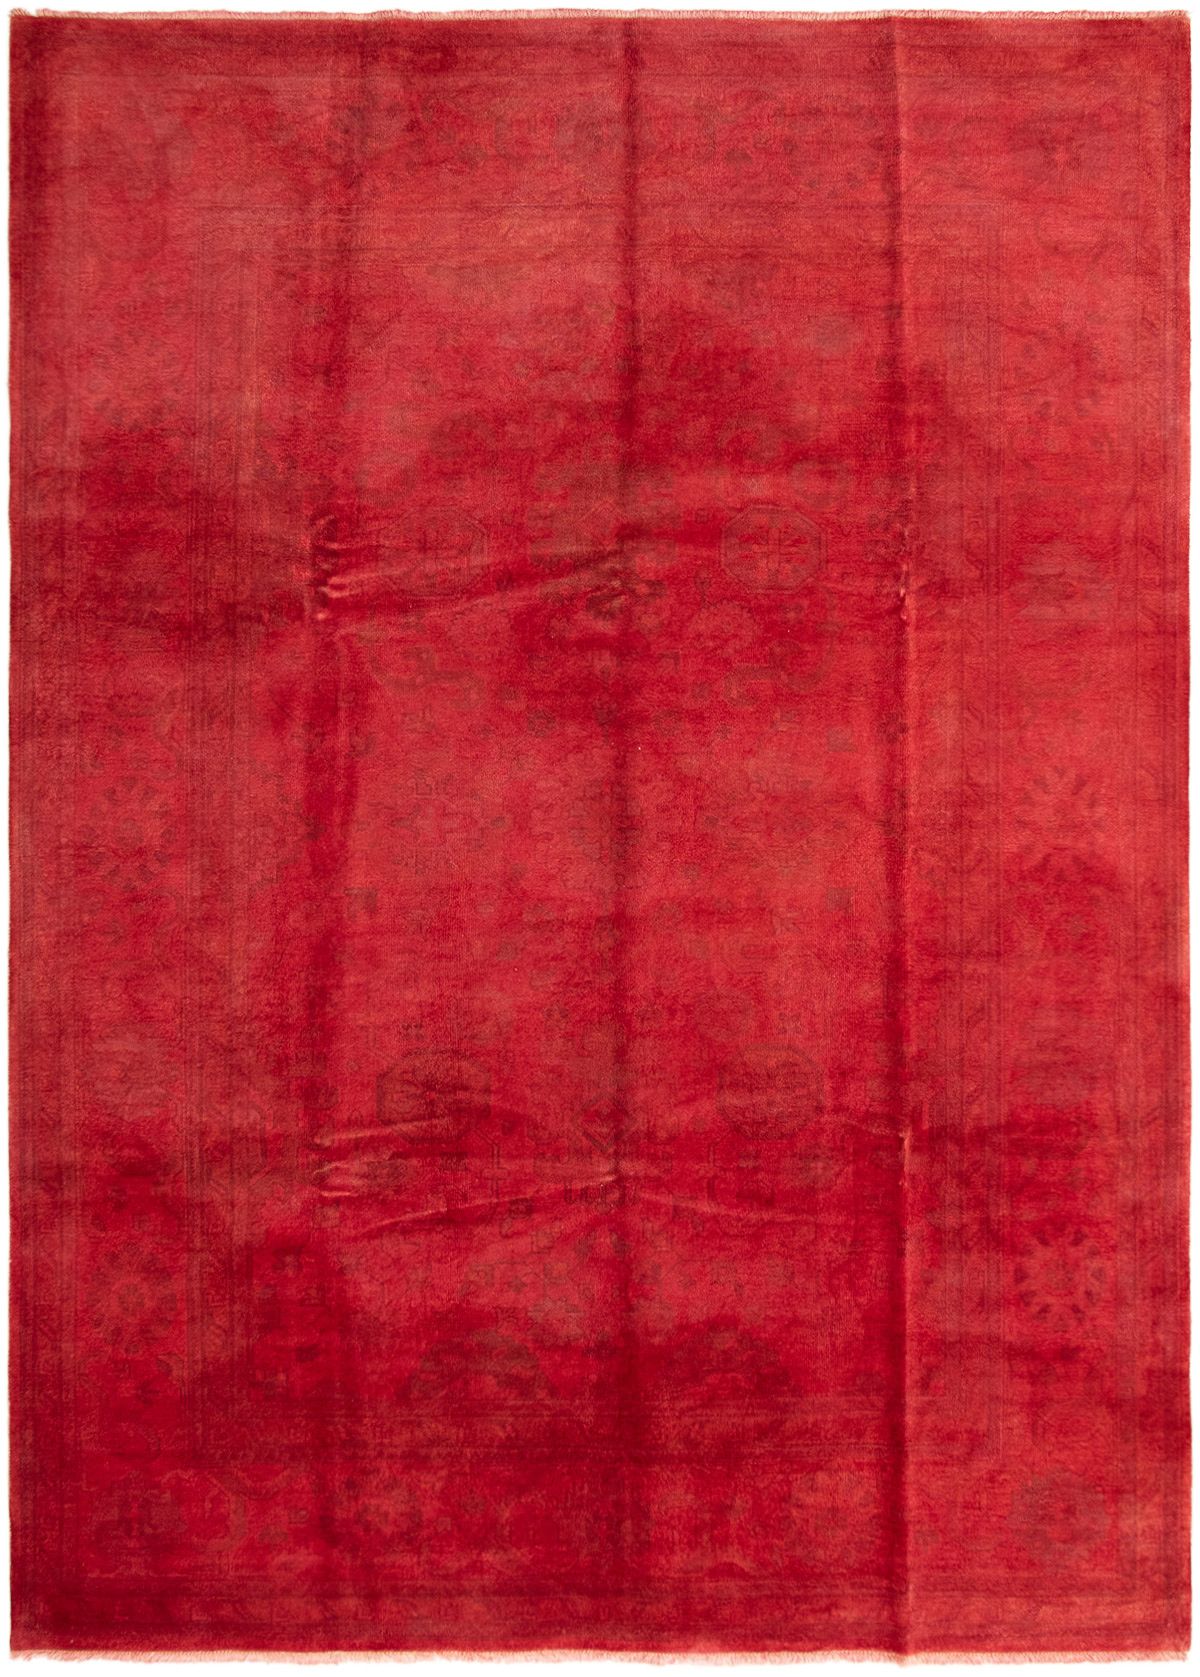 Hand-knotted Color transition Red Wool Rug 9'9" x 13'7" Size: 9'9" x 13'7"  